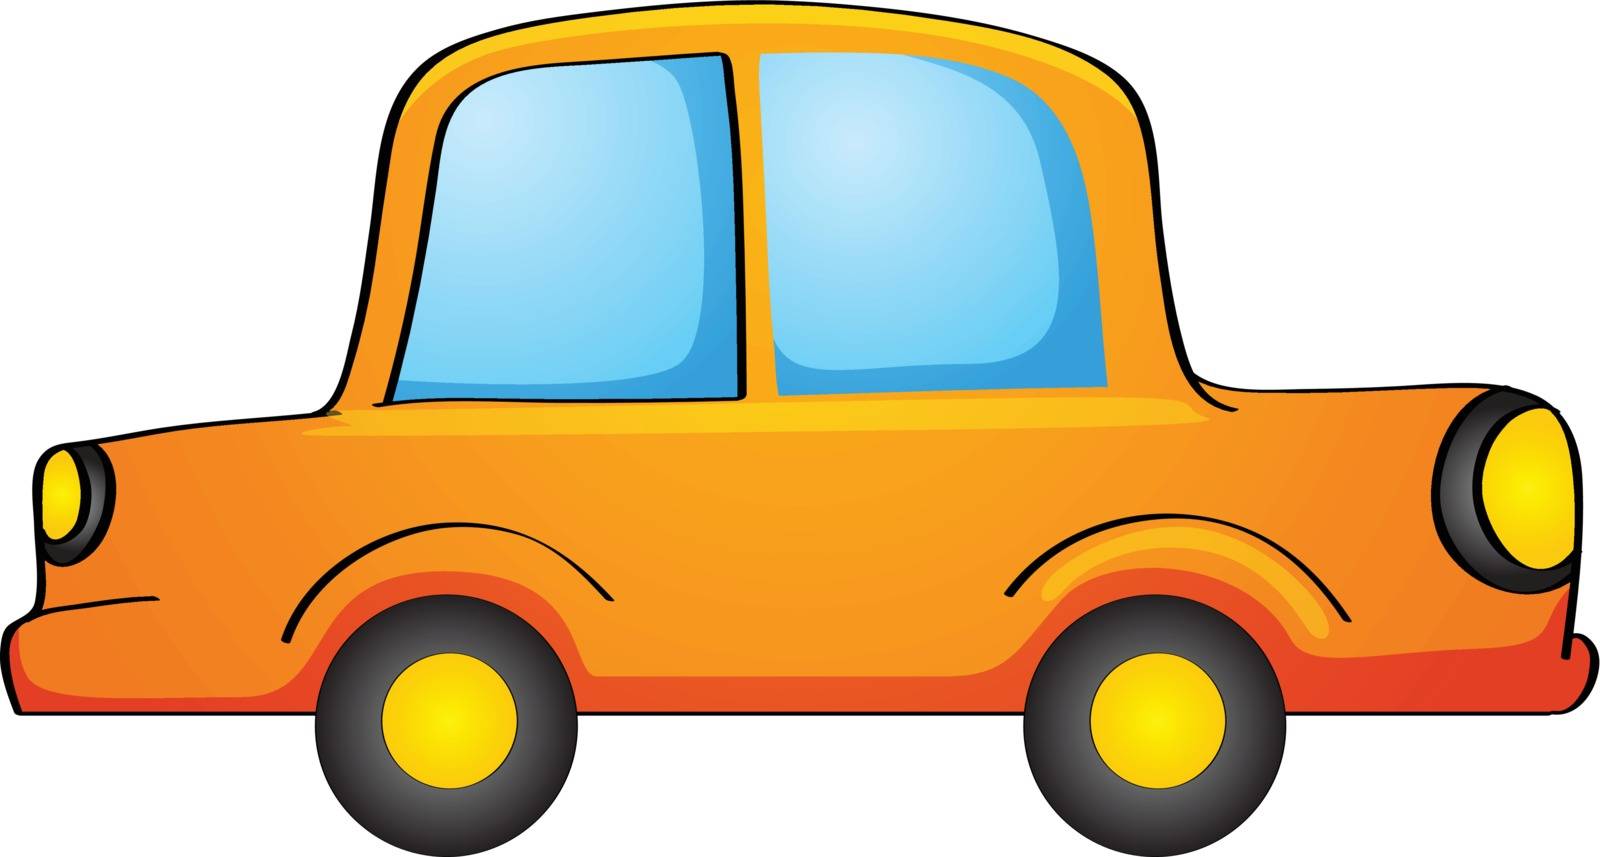 illustration of a car on white background